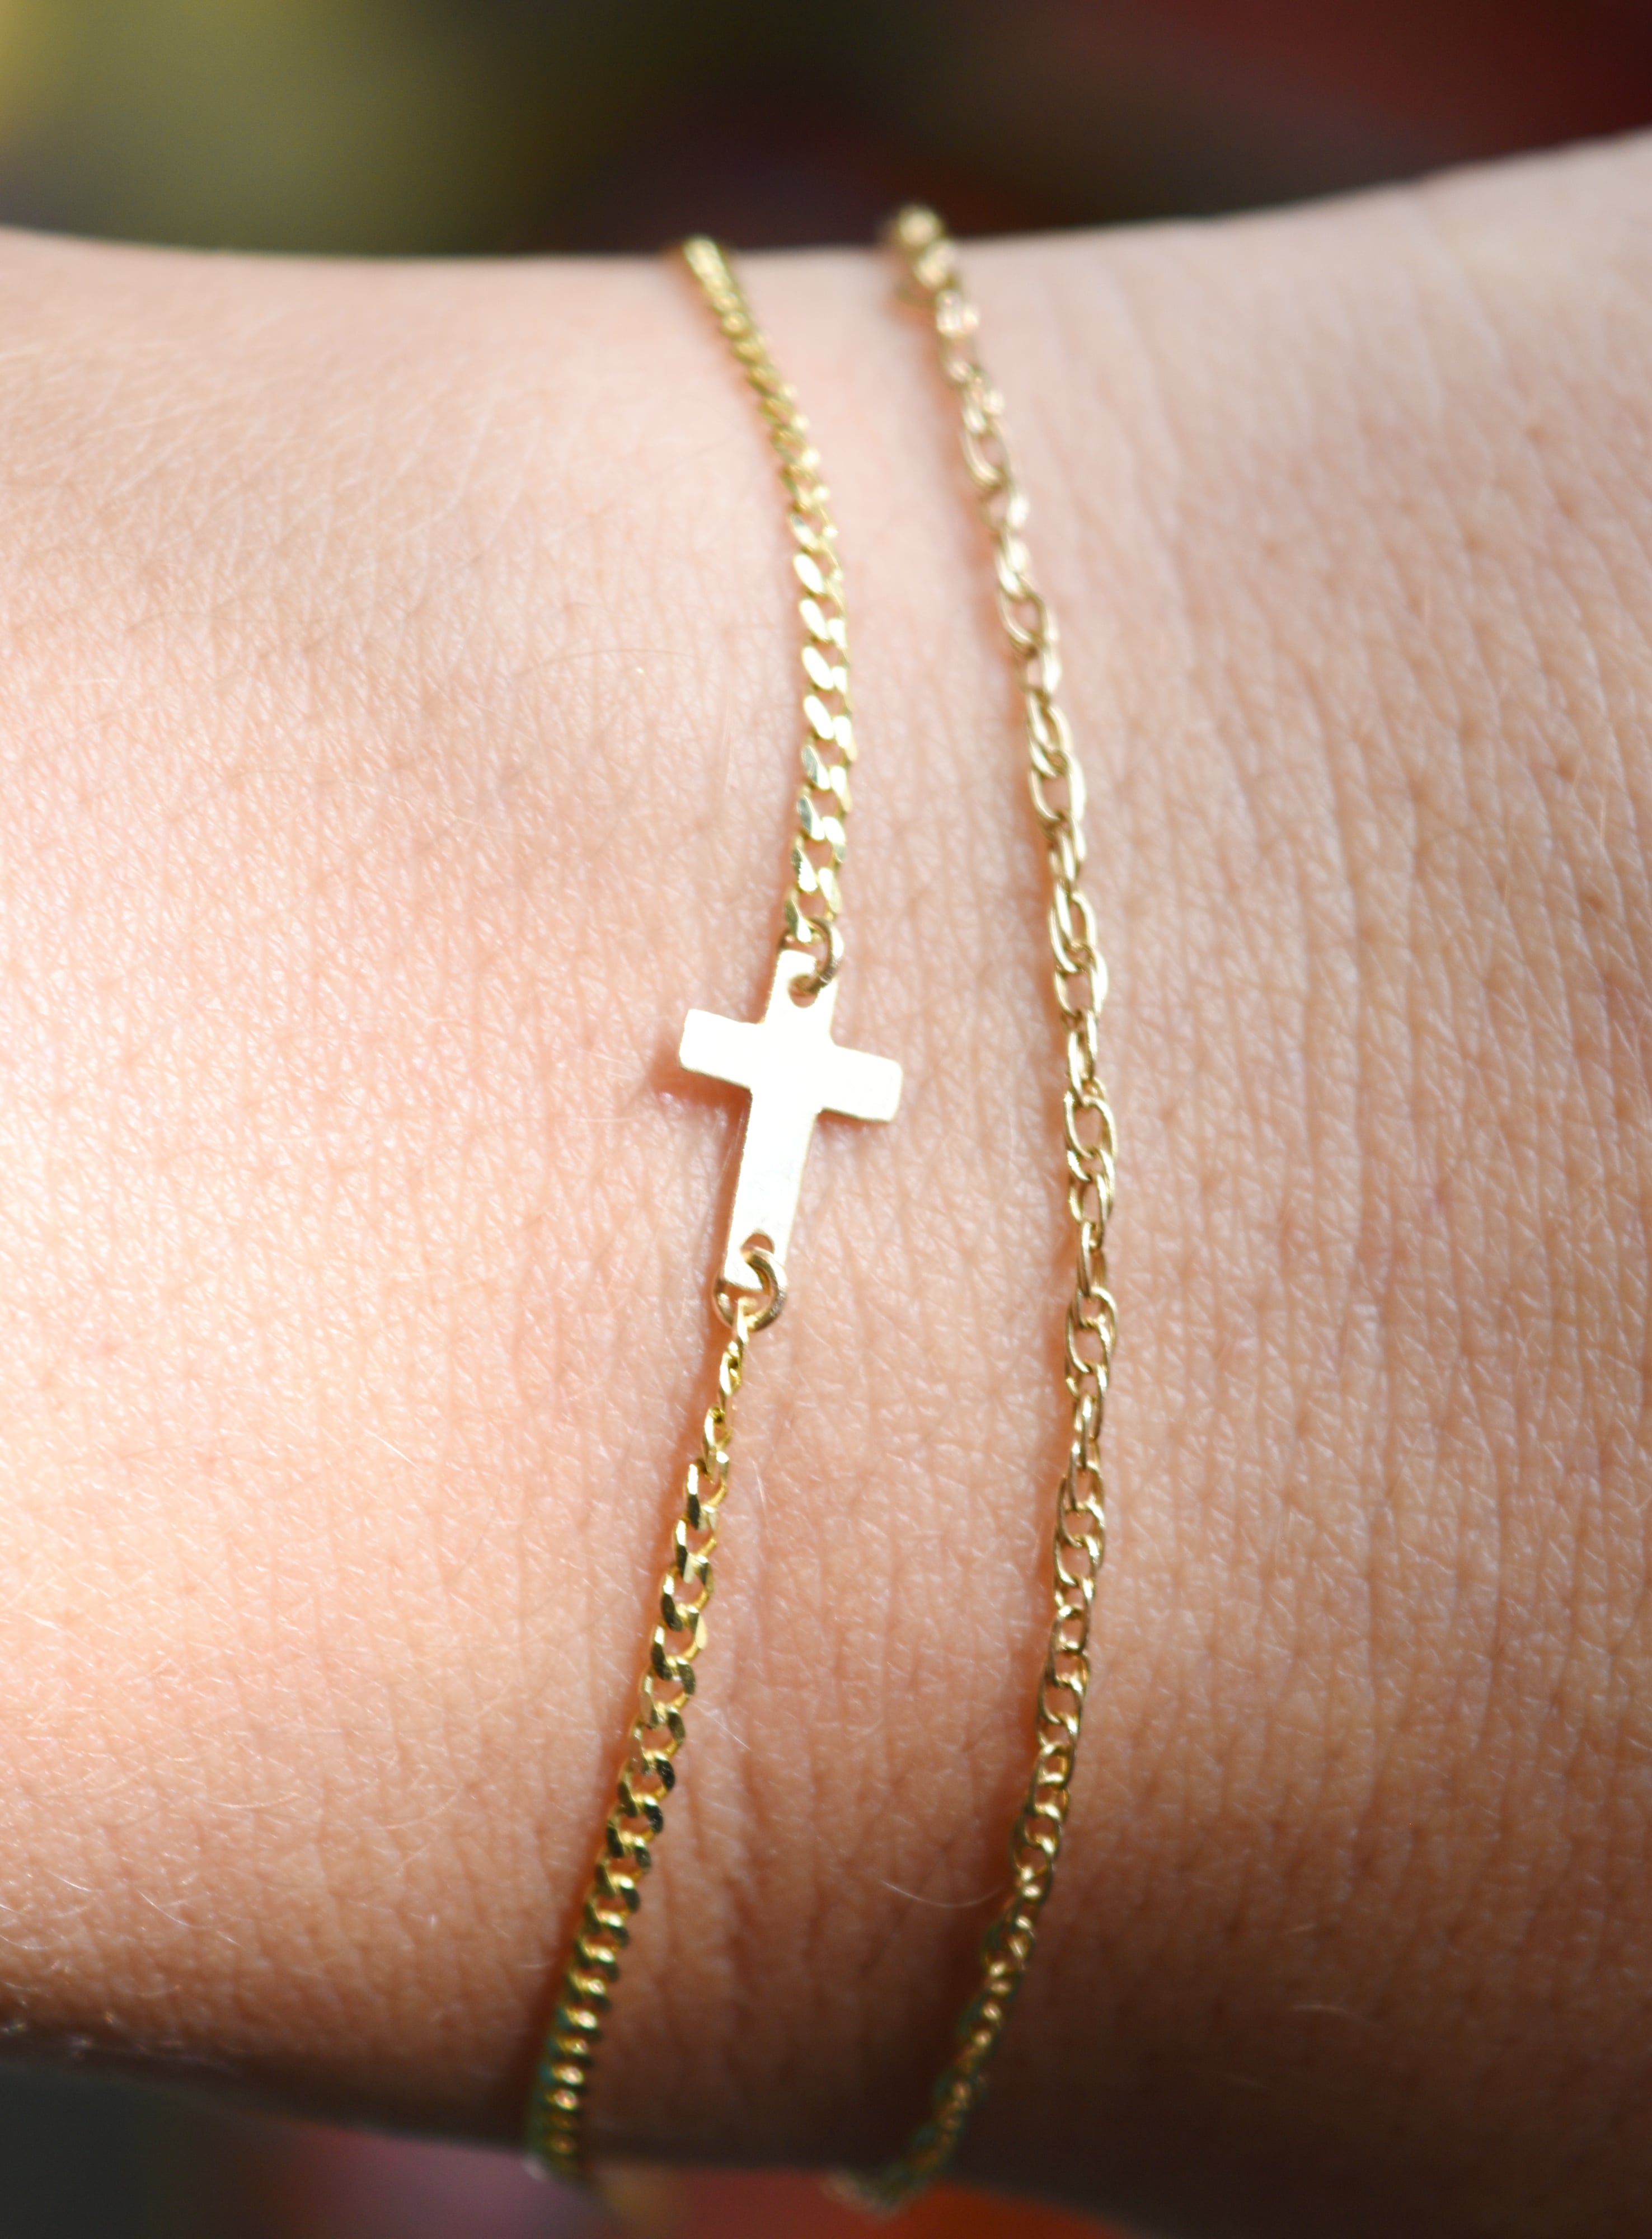 Bicone Inscribed Cross Bracelet - Gold Plated on 925 Sterling Silver